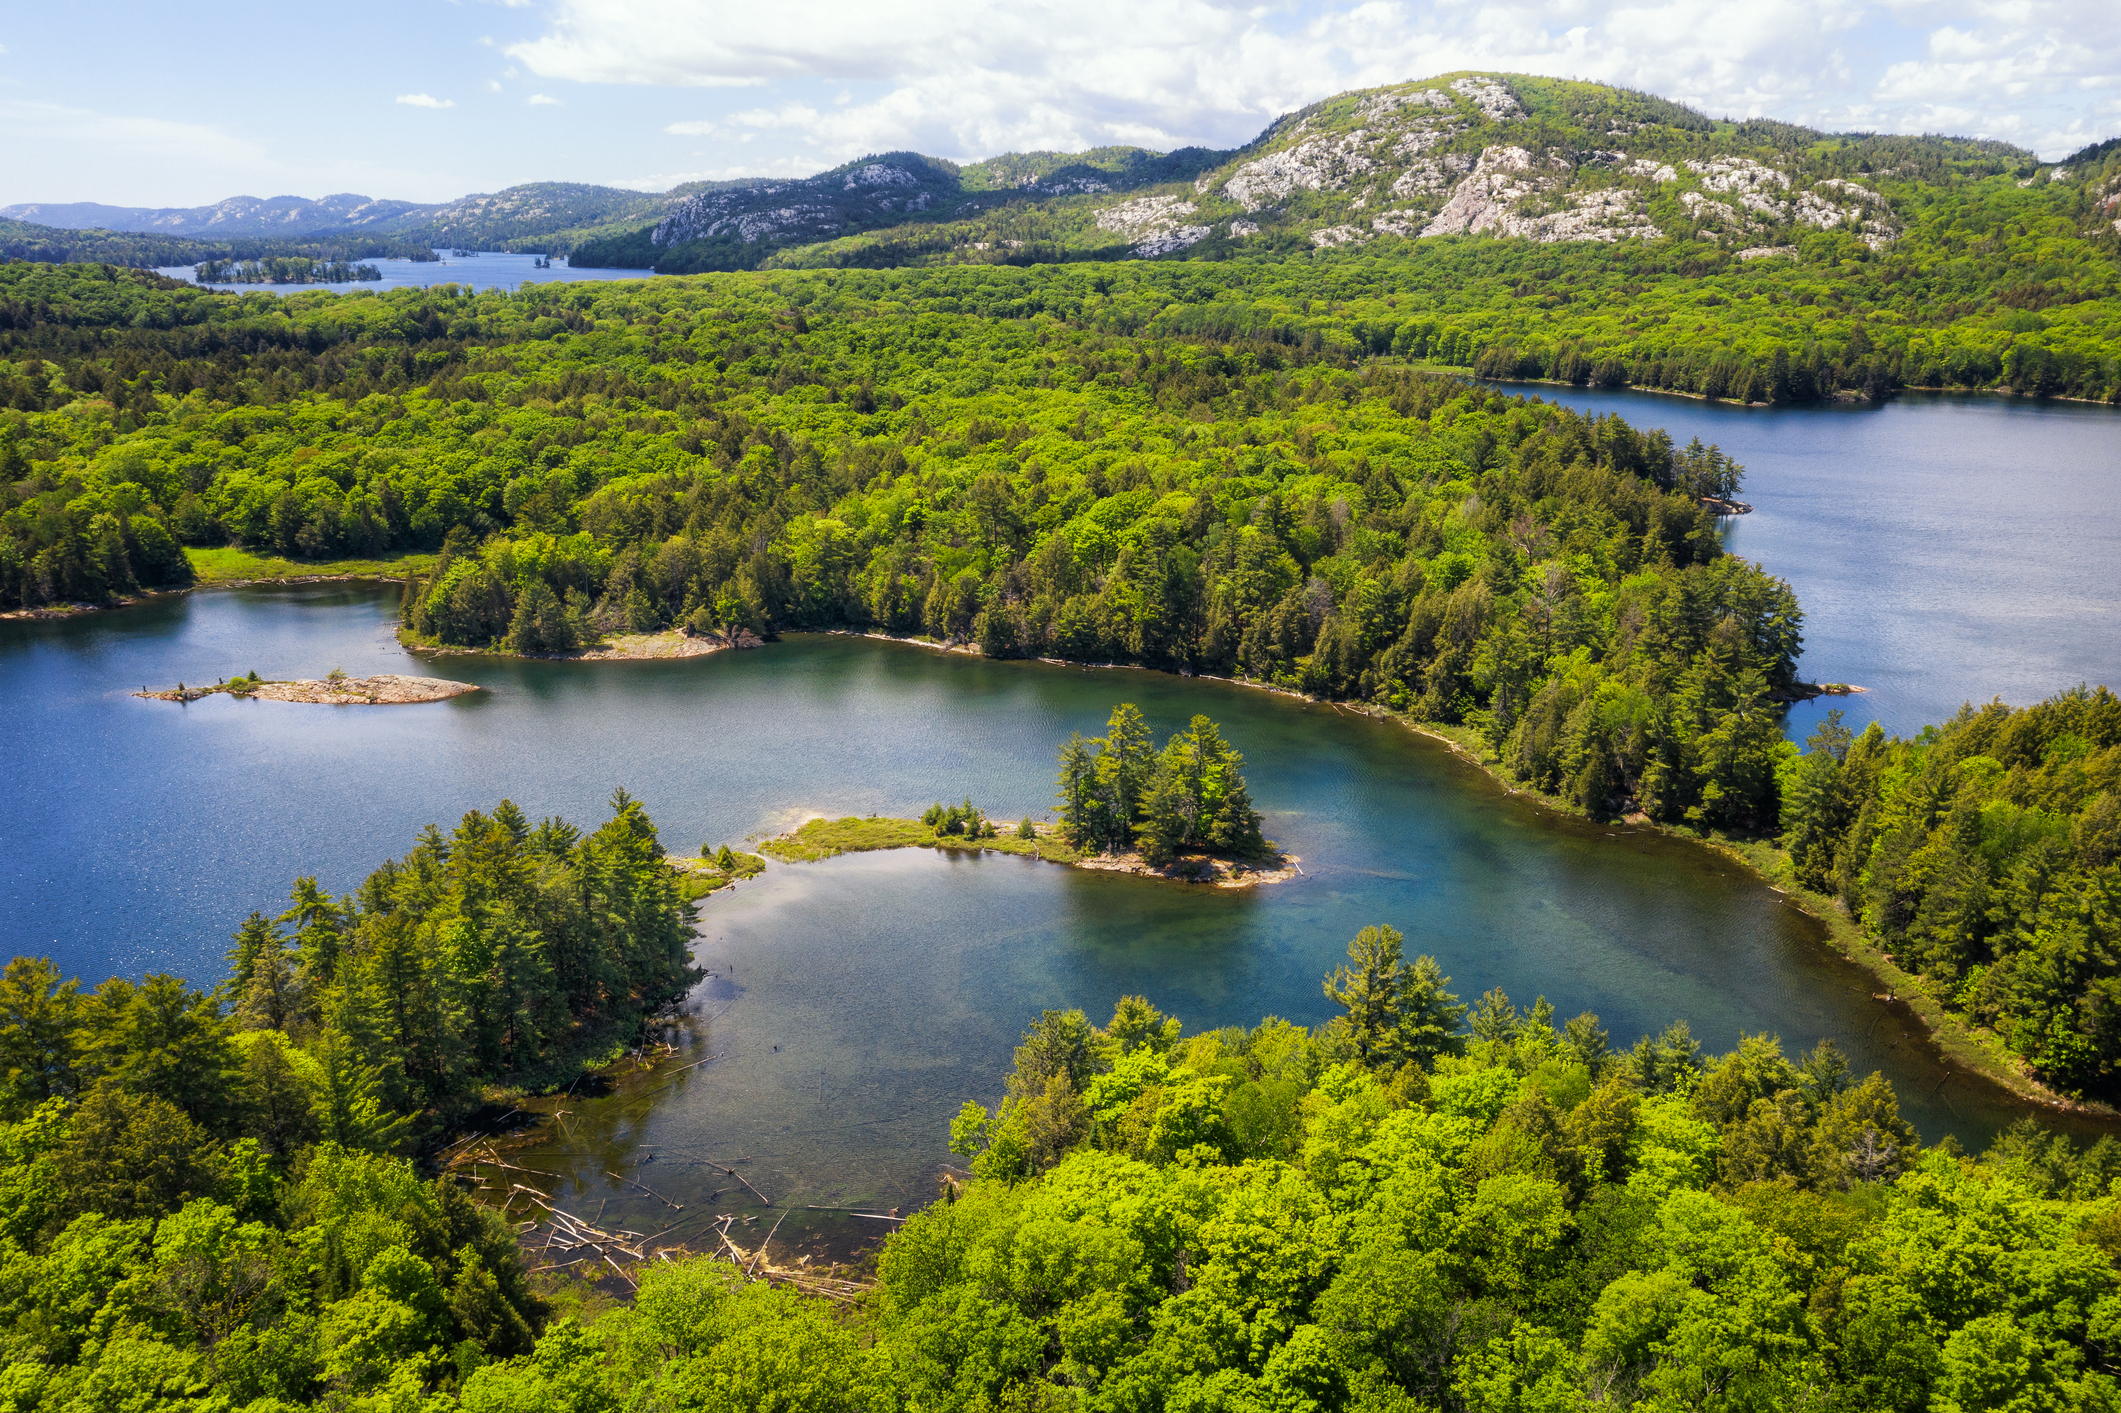 Aerial view of a serene lake with surrounding forest and mountains in the distance